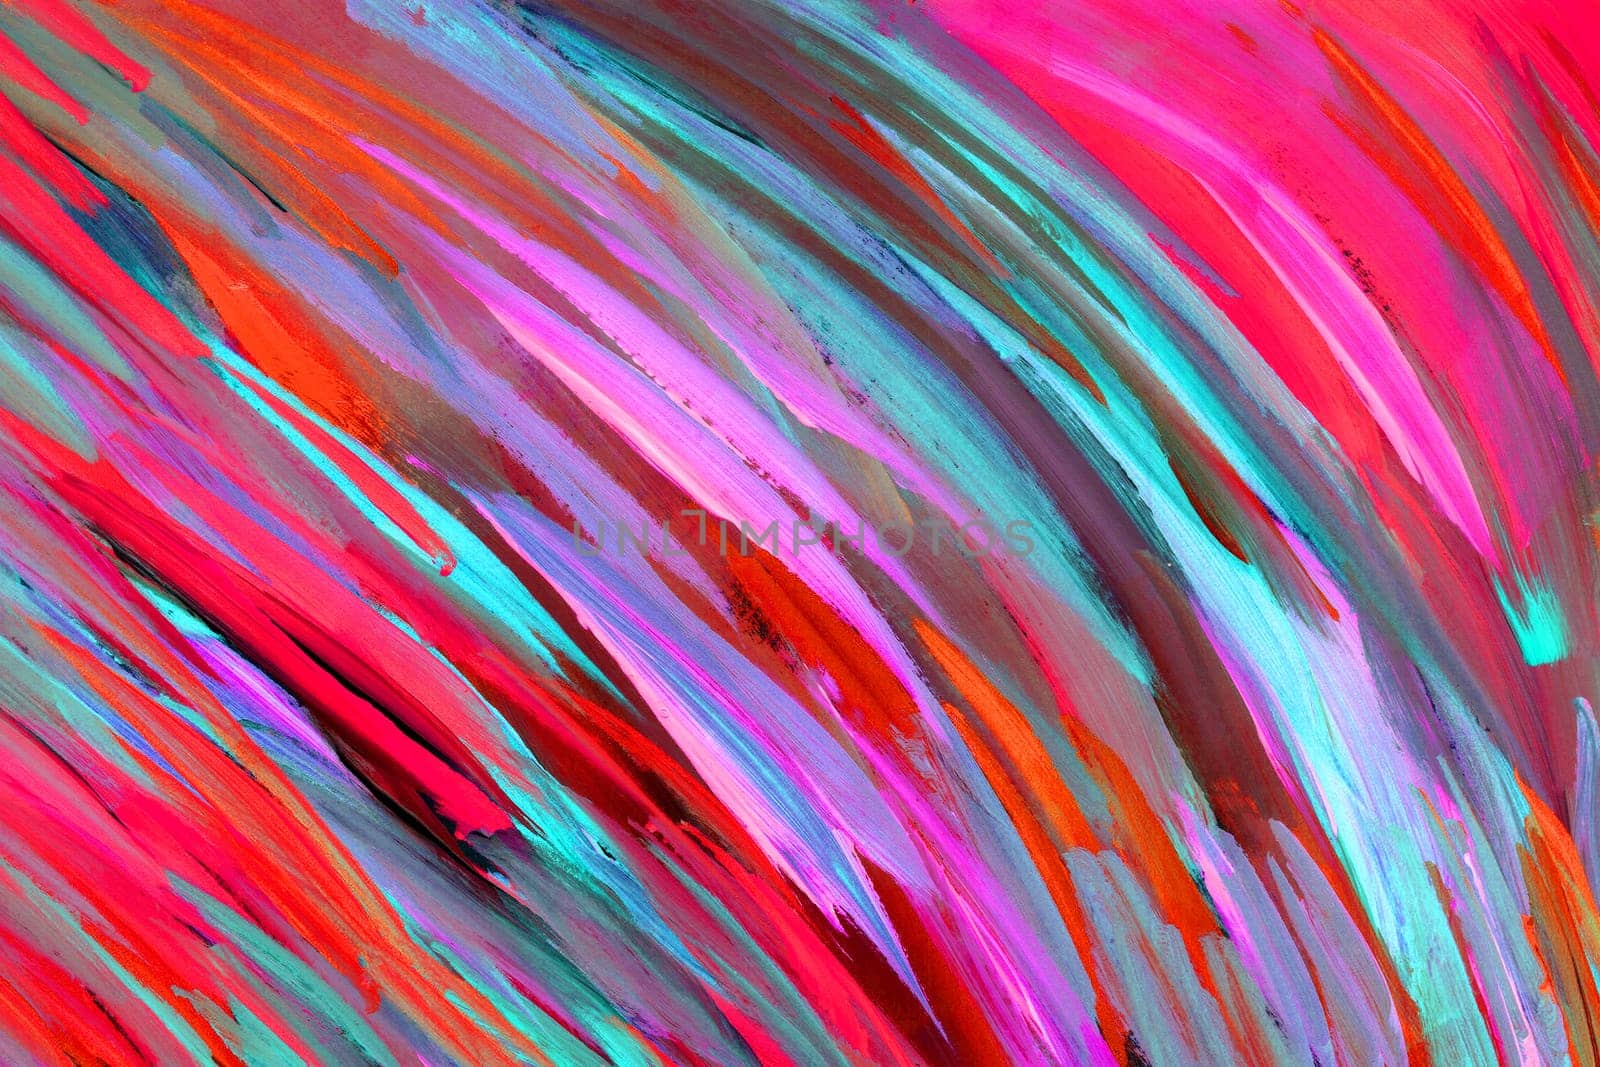 Vibrant Pink colorful abstract textured background